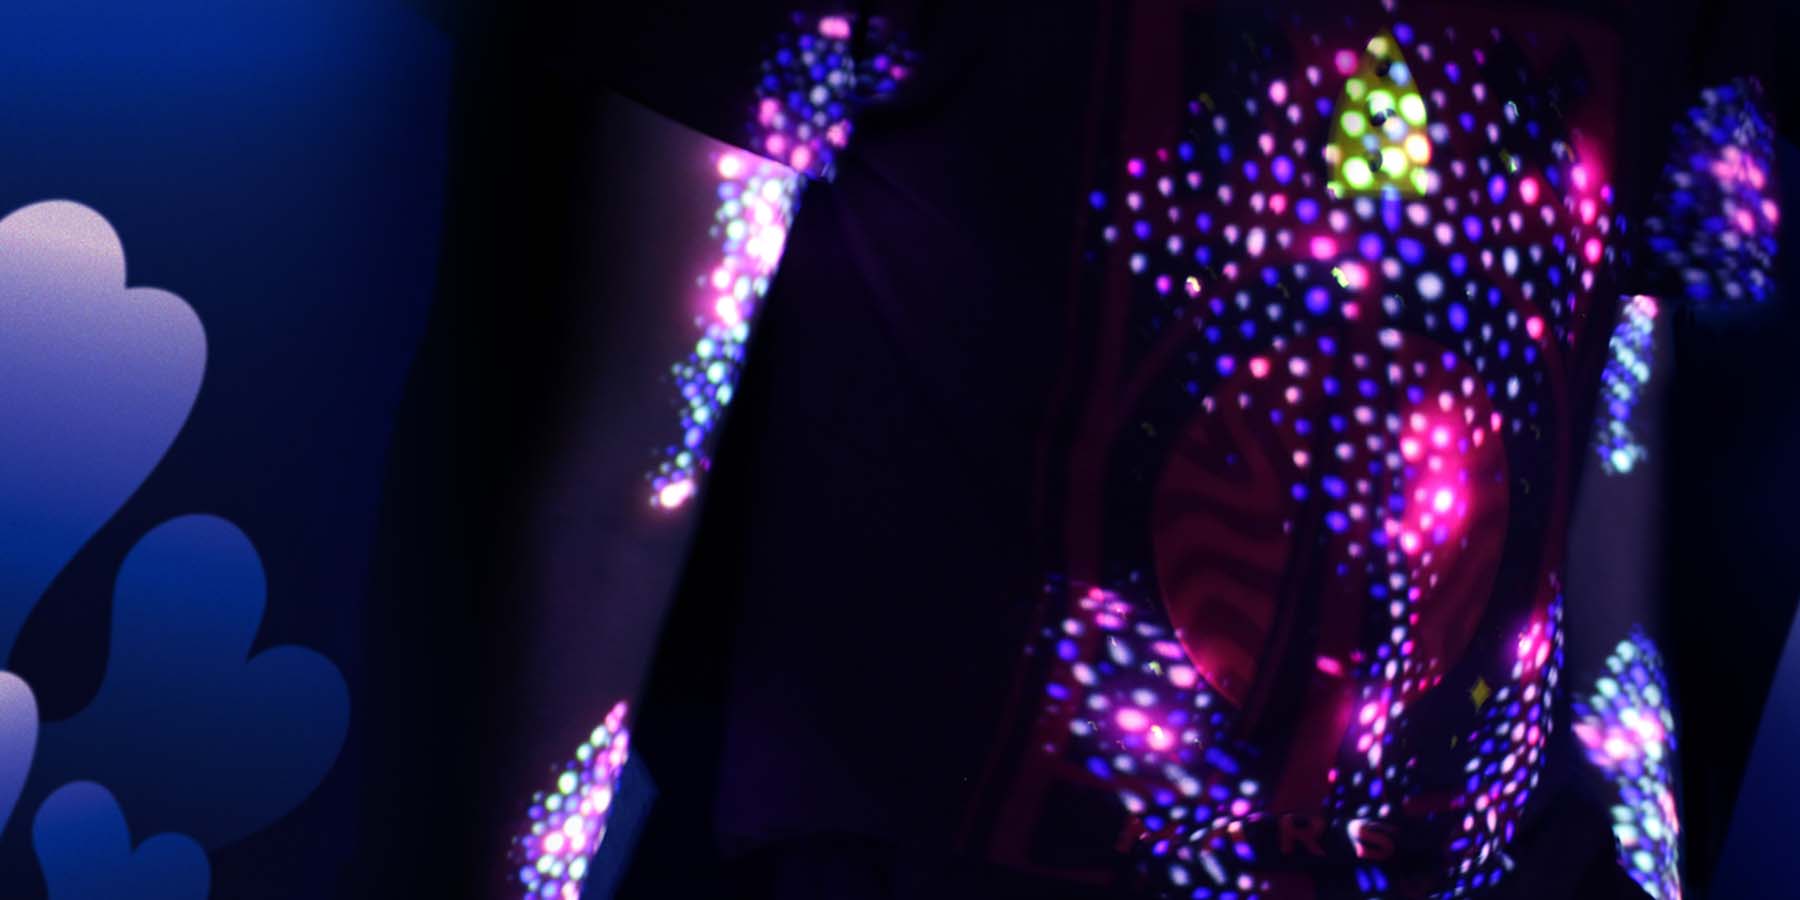 Animated bio dots are projected onto the user's body, turning them into magnificent bioluminescent creatures.